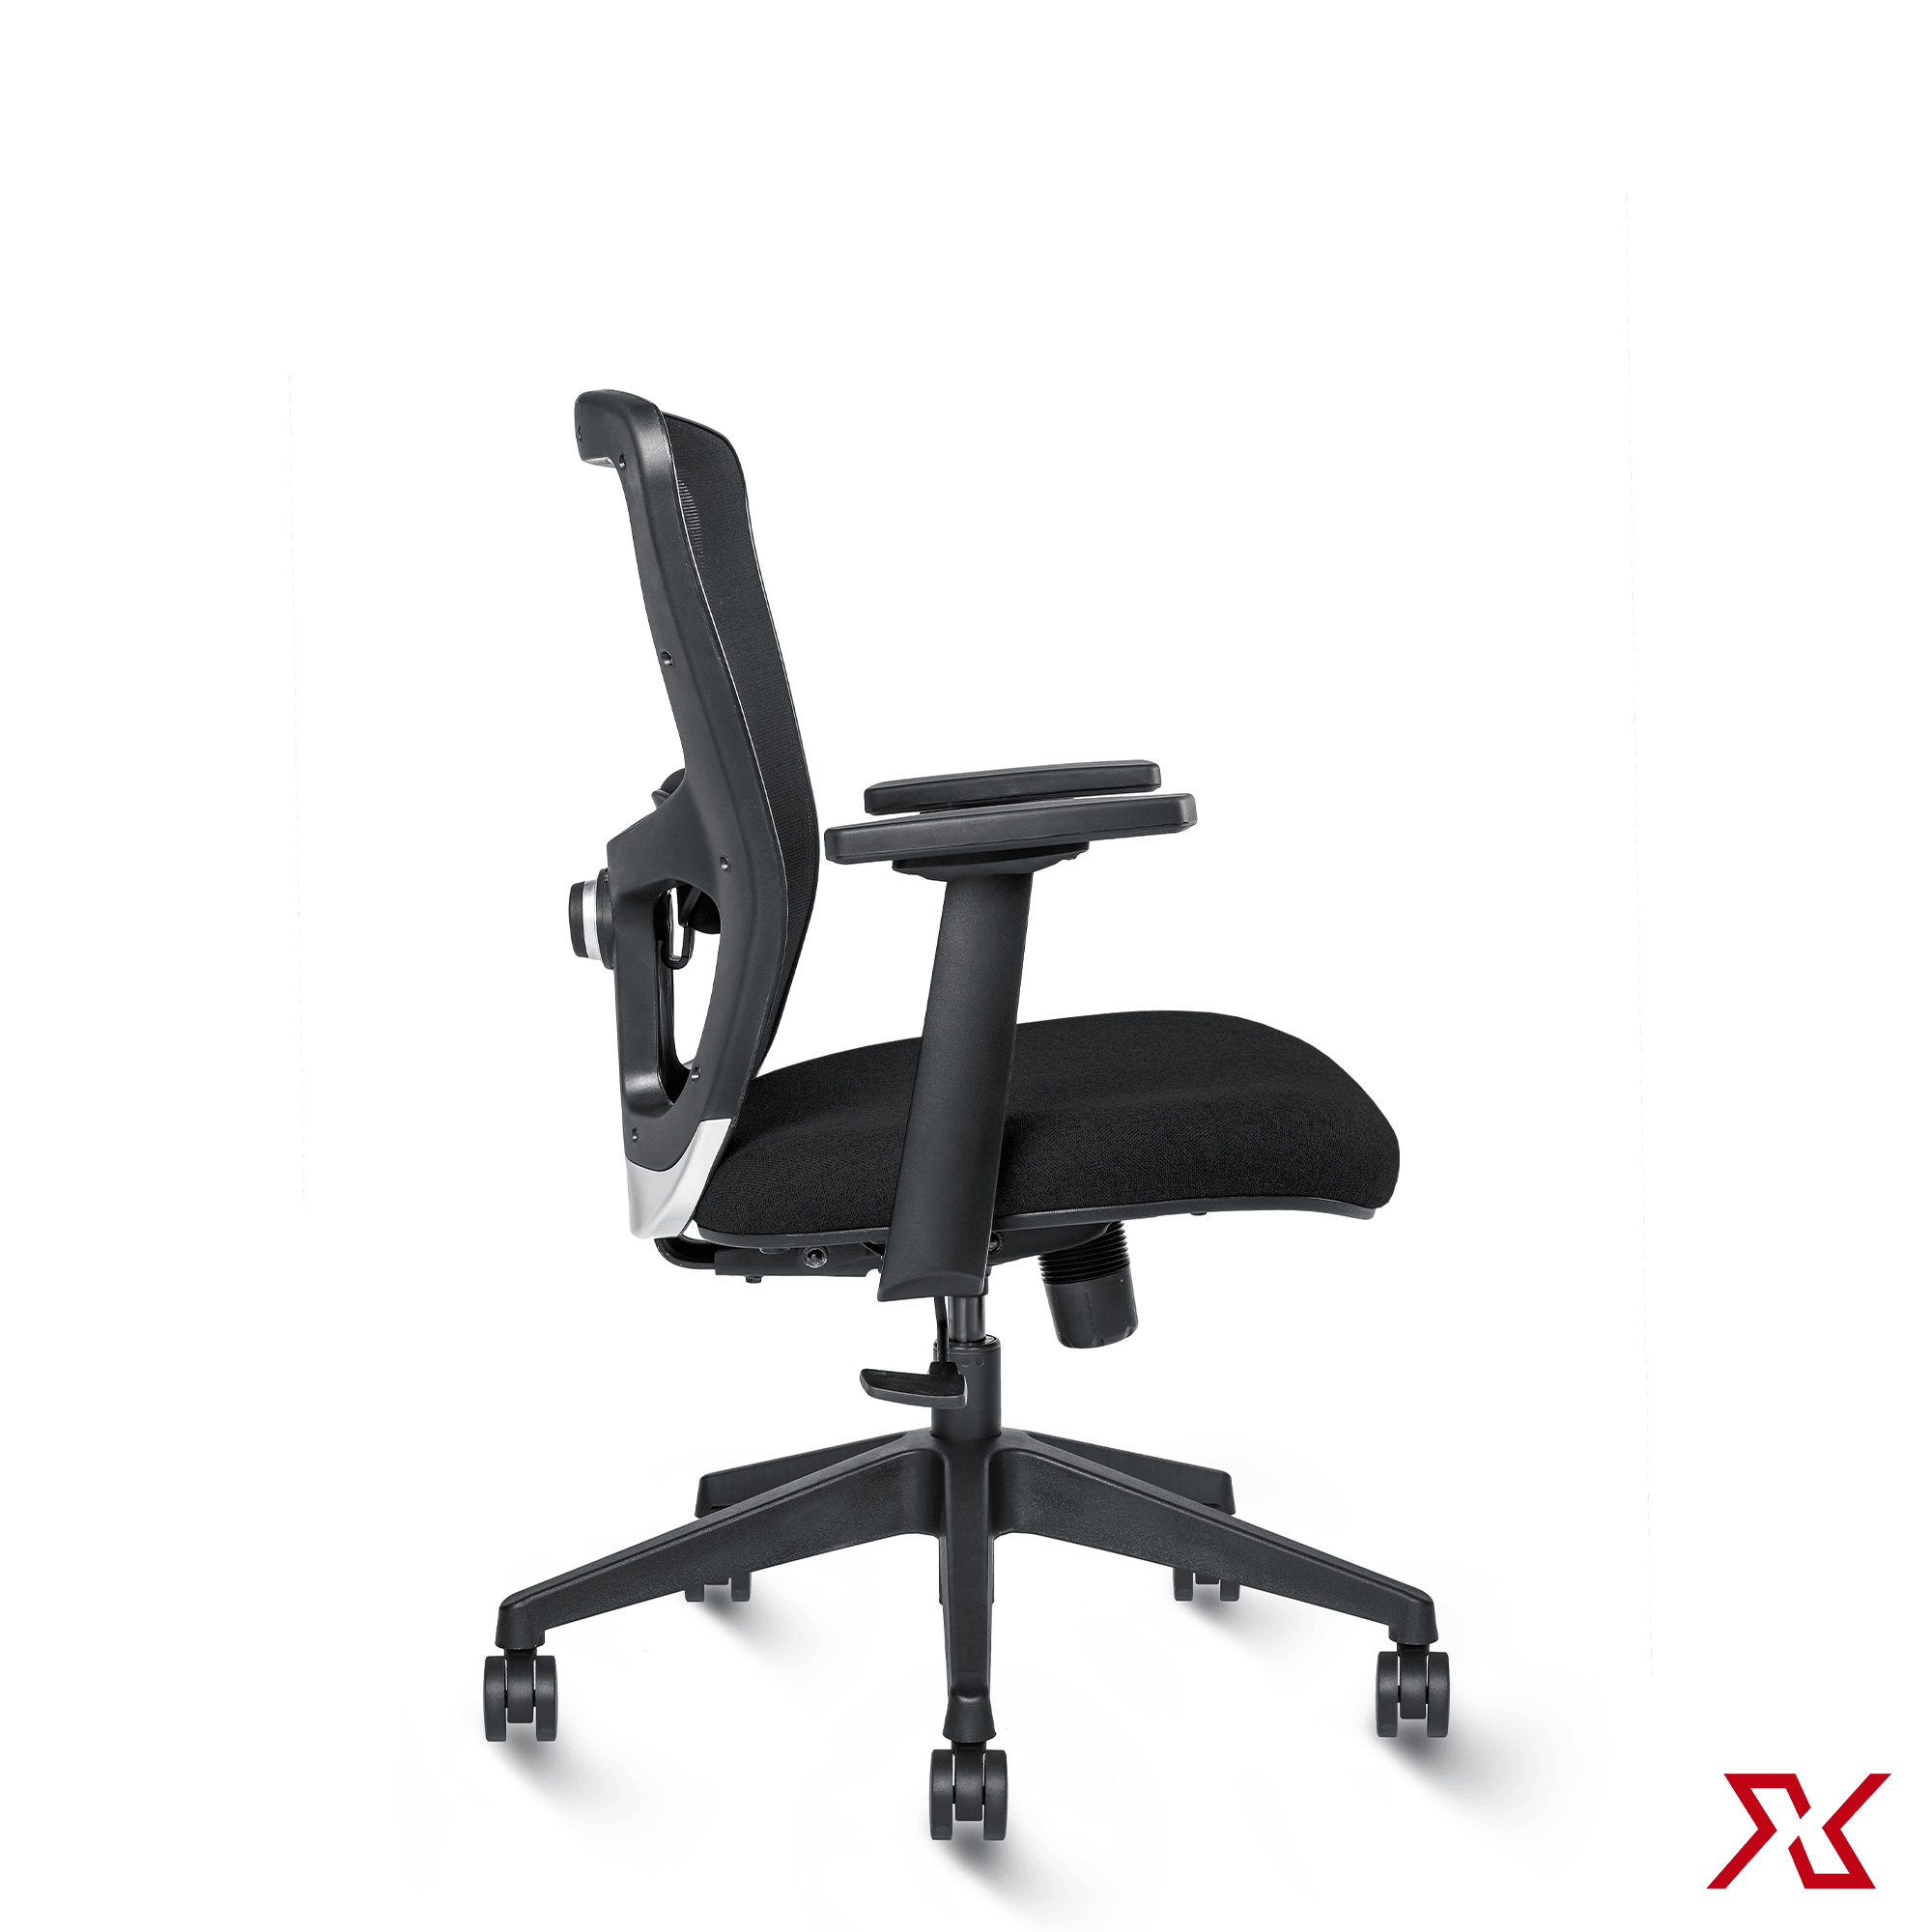 JAZZ Medium Back Fly (Black Chair) - Exclusiff Seating Sytems